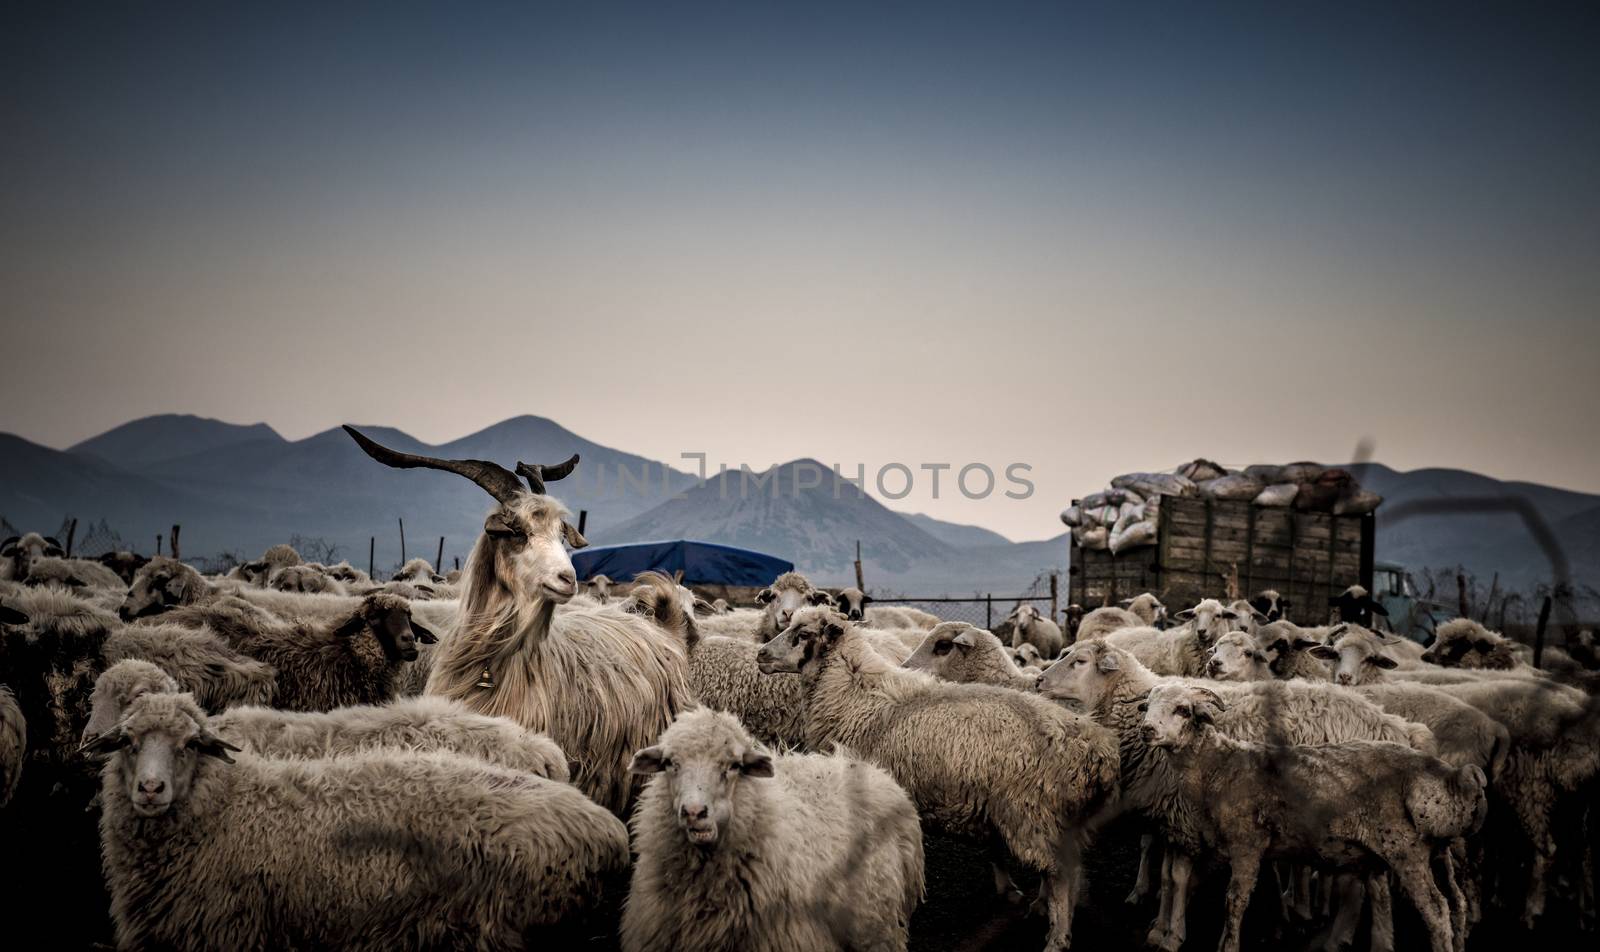 Beautiful image of a herd of sheep in the mountains